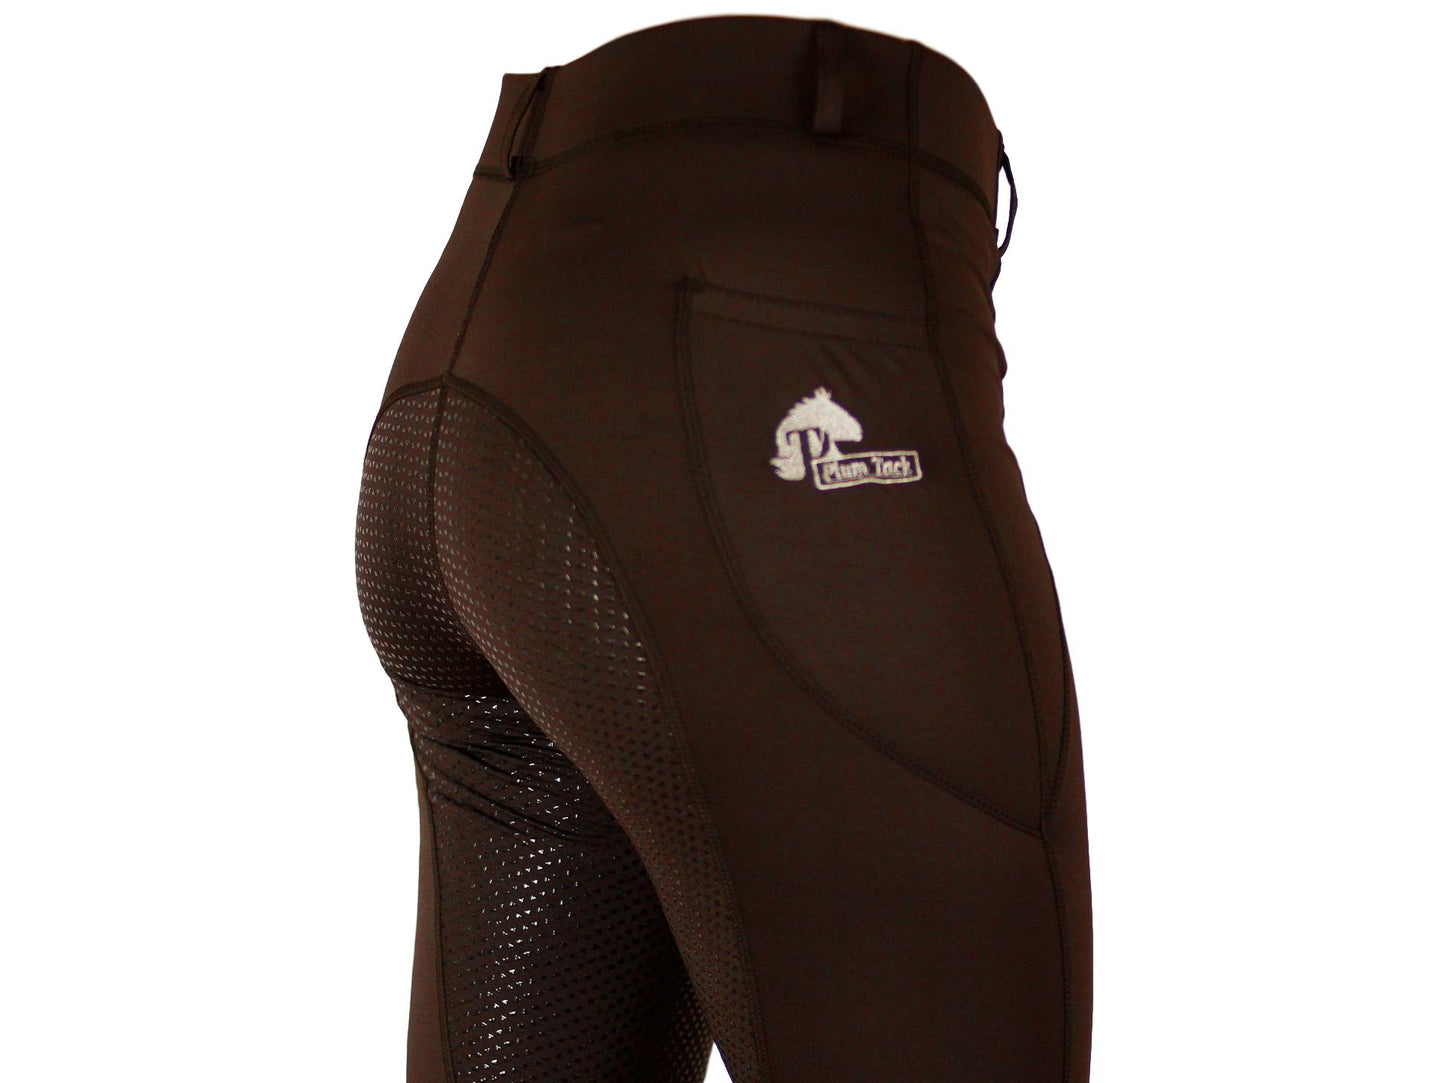 Close-up of brown horse riding tights with mesh detail and logo.